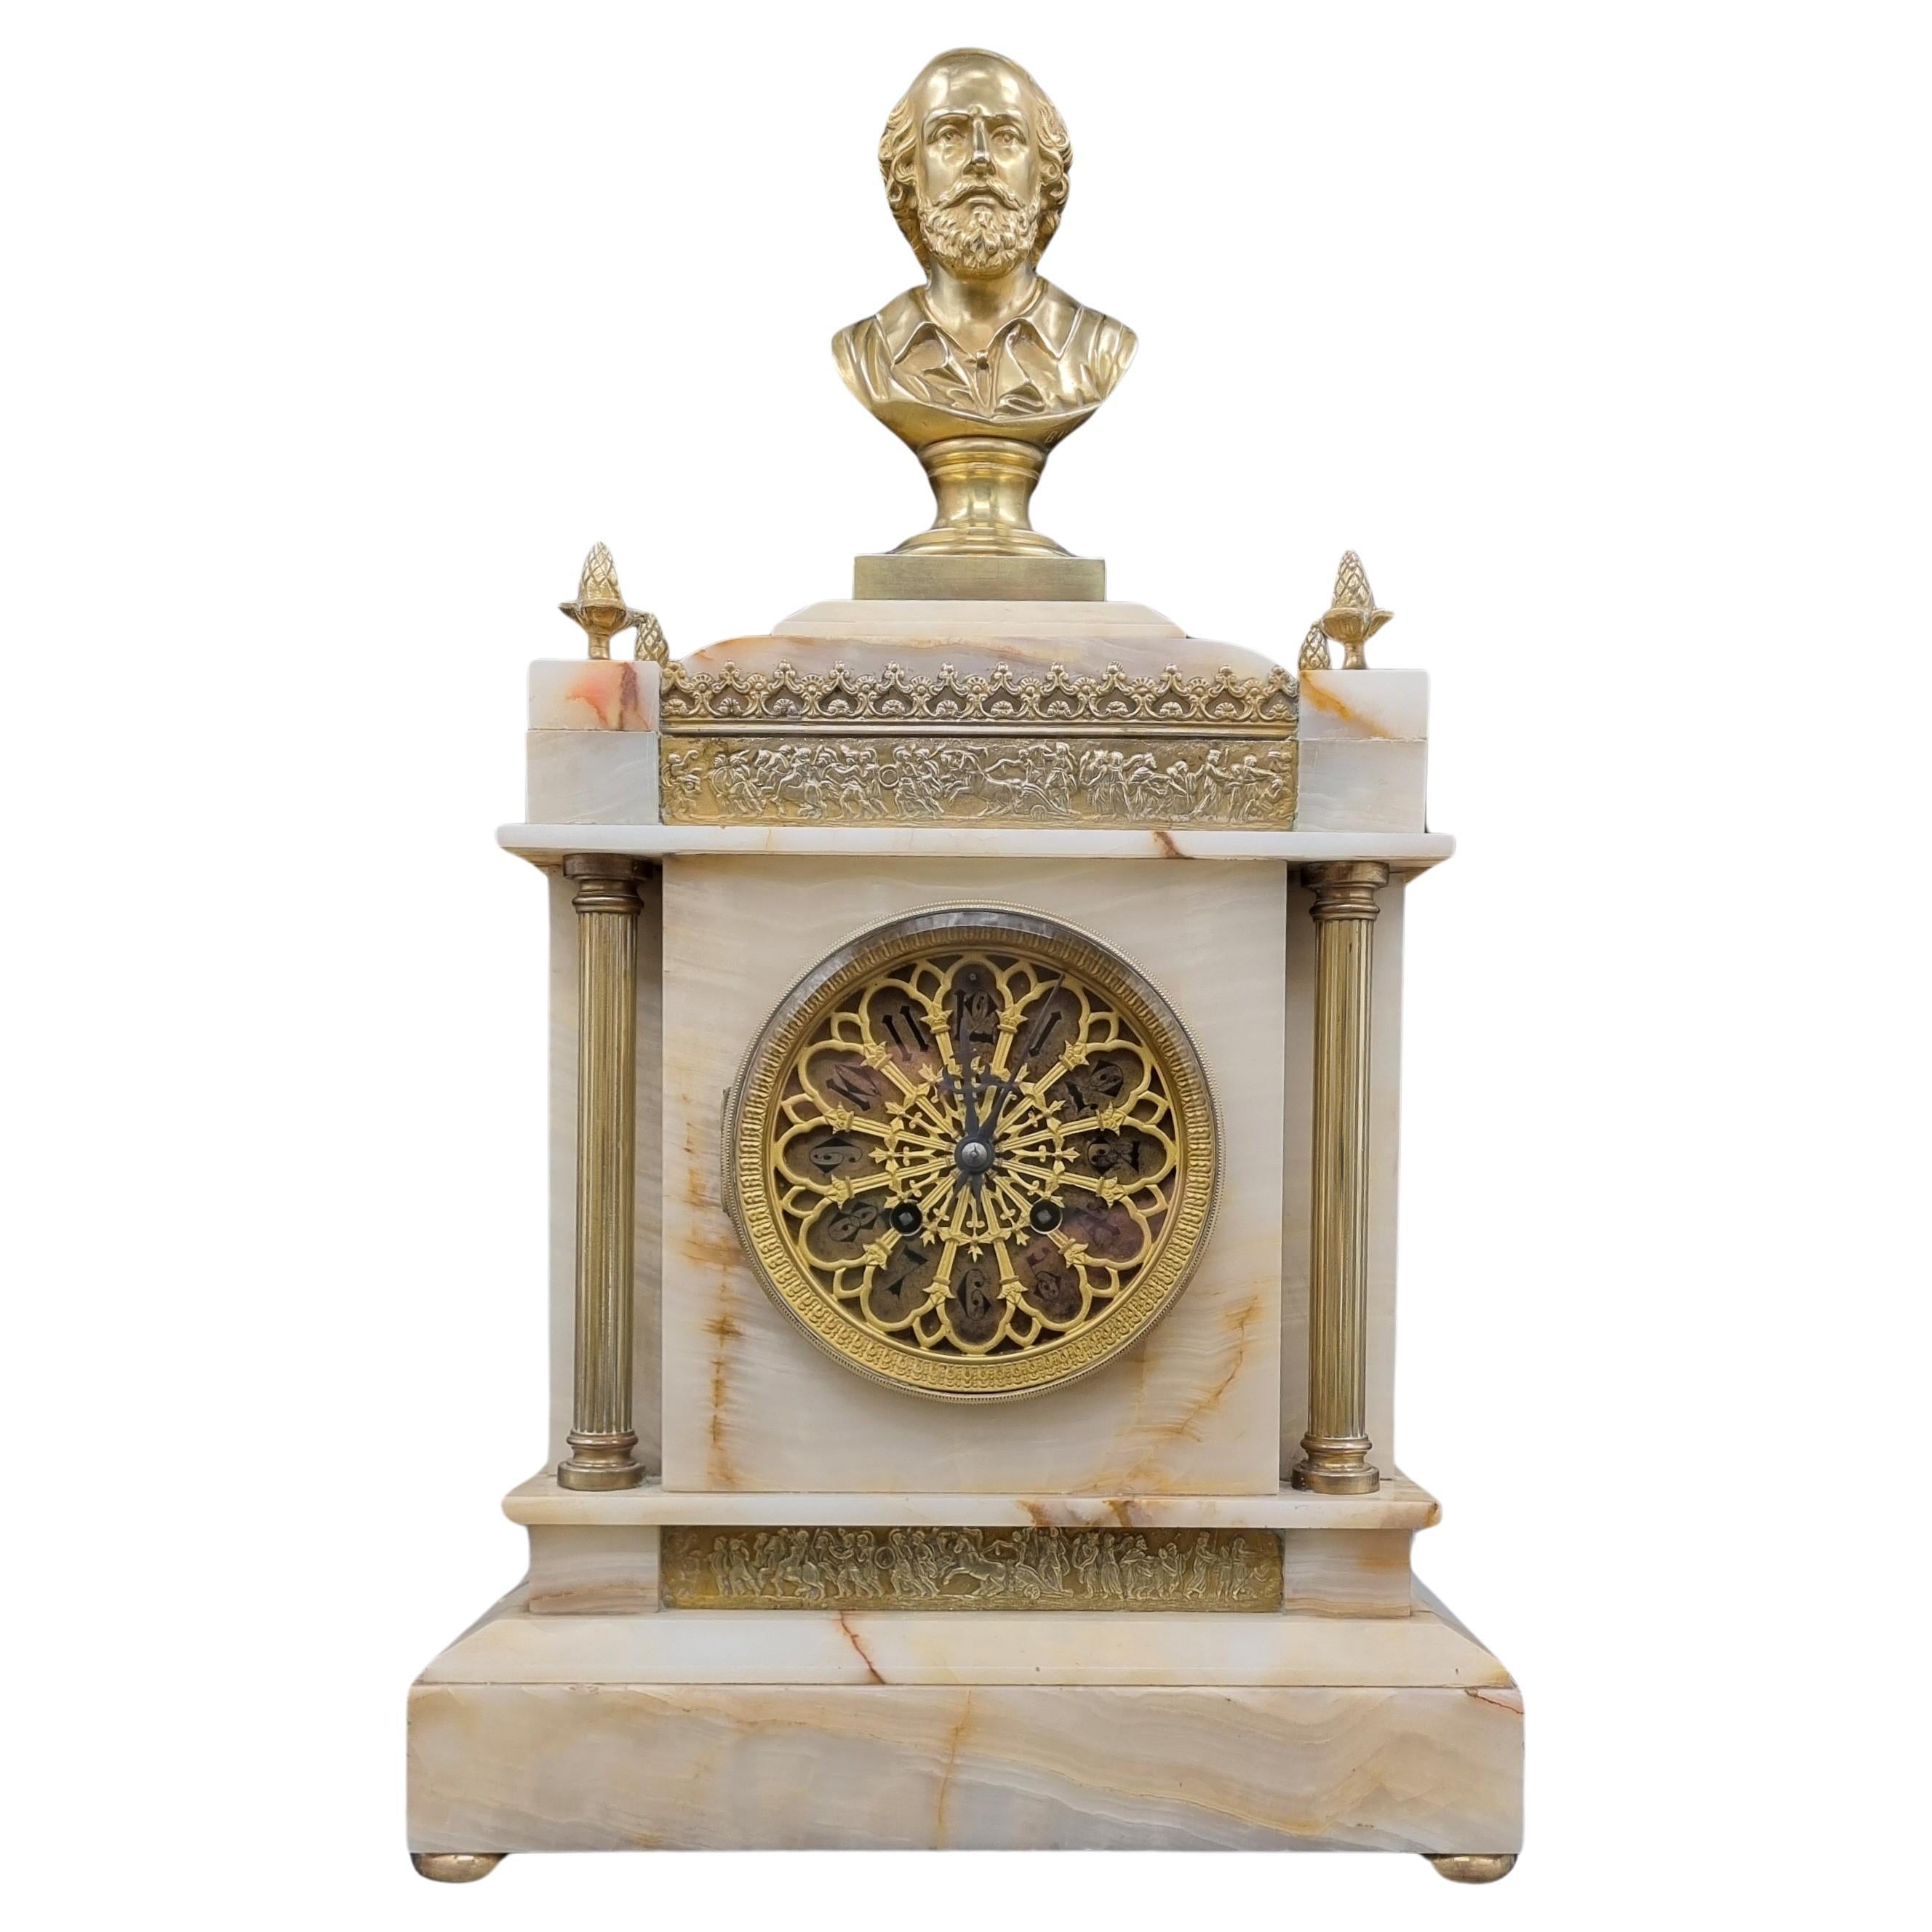 19th Century Onyx and Bronze Clock with William Shakespeare